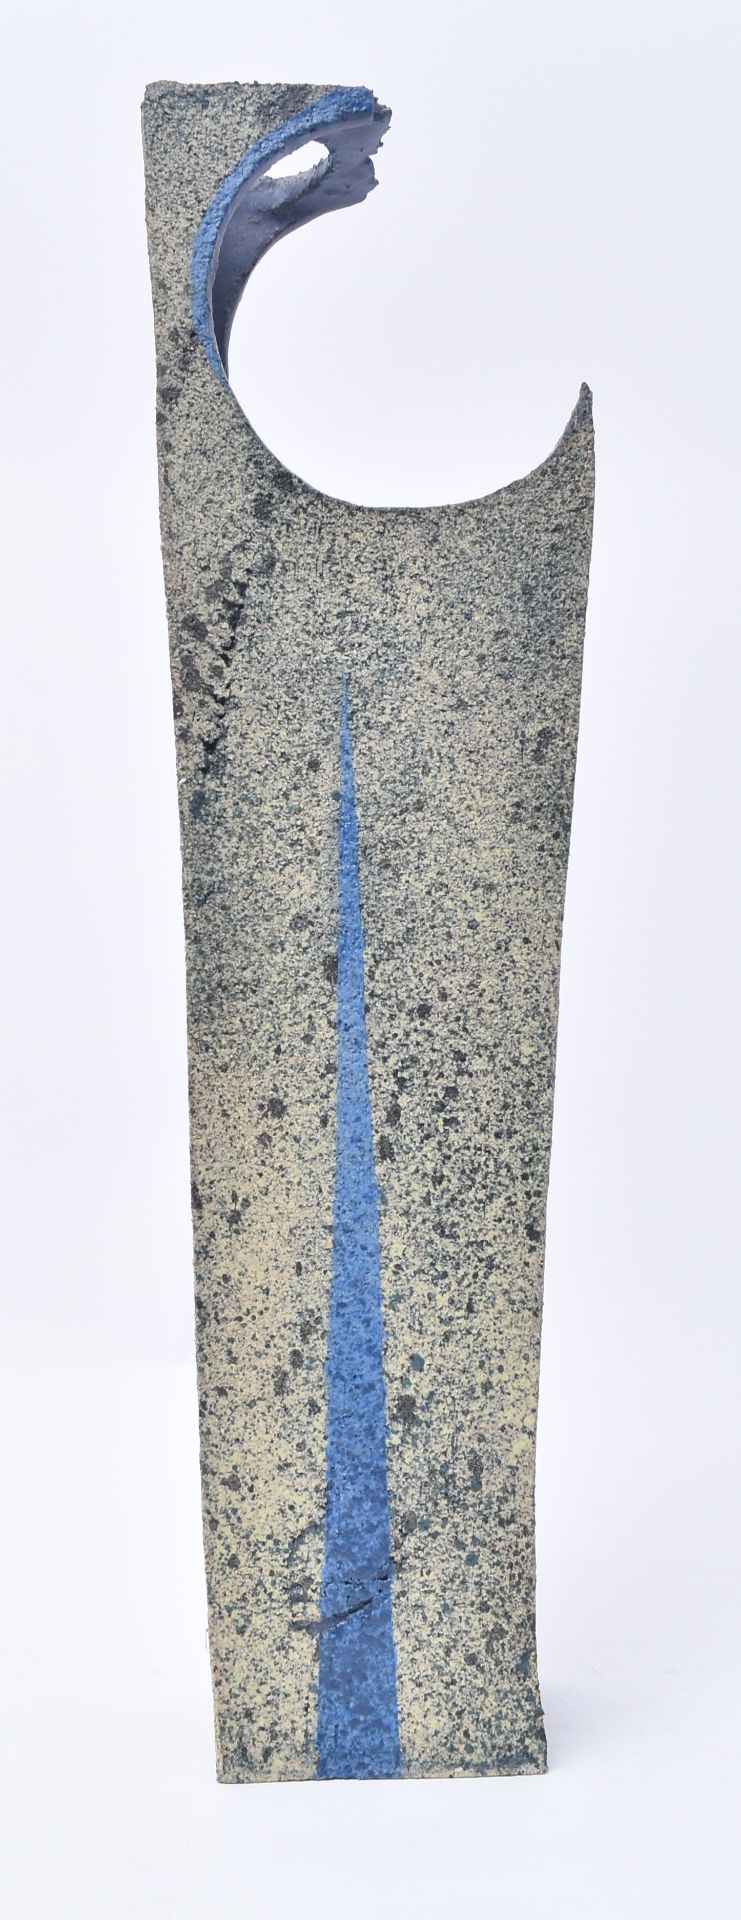 PAUL PHILP - STUDIO POTTERY - A RETRO ABSTRACT TAPERED VASE - Image 5 of 7